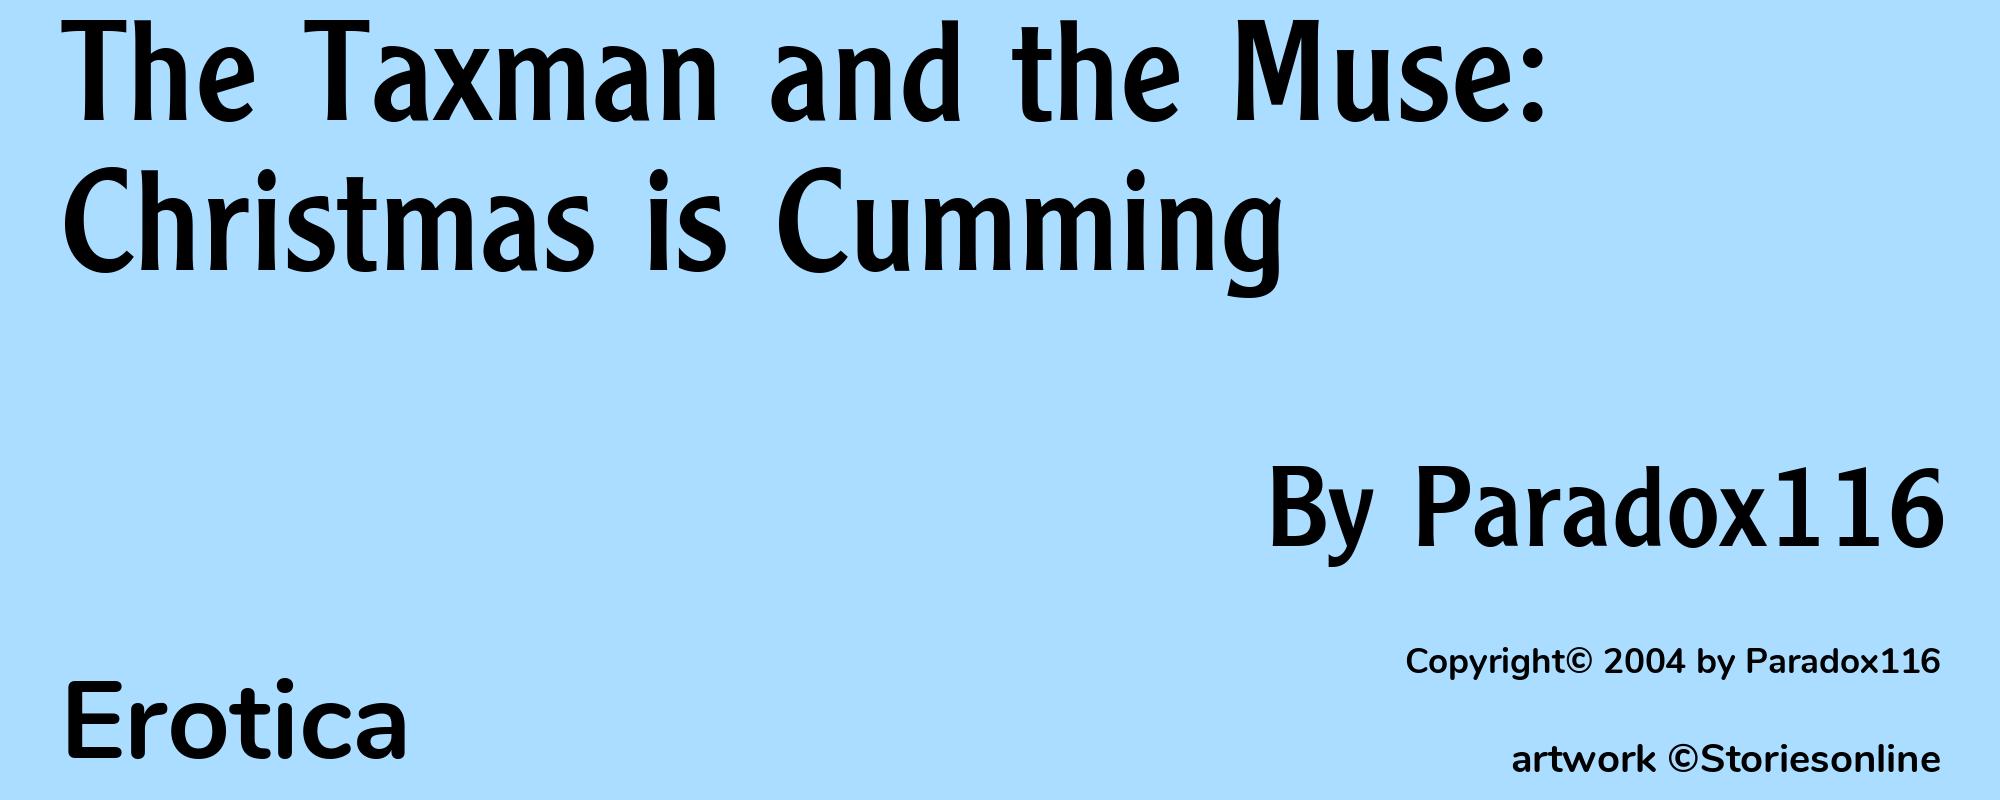 The Taxman and the Muse: Christmas is Cumming - Cover